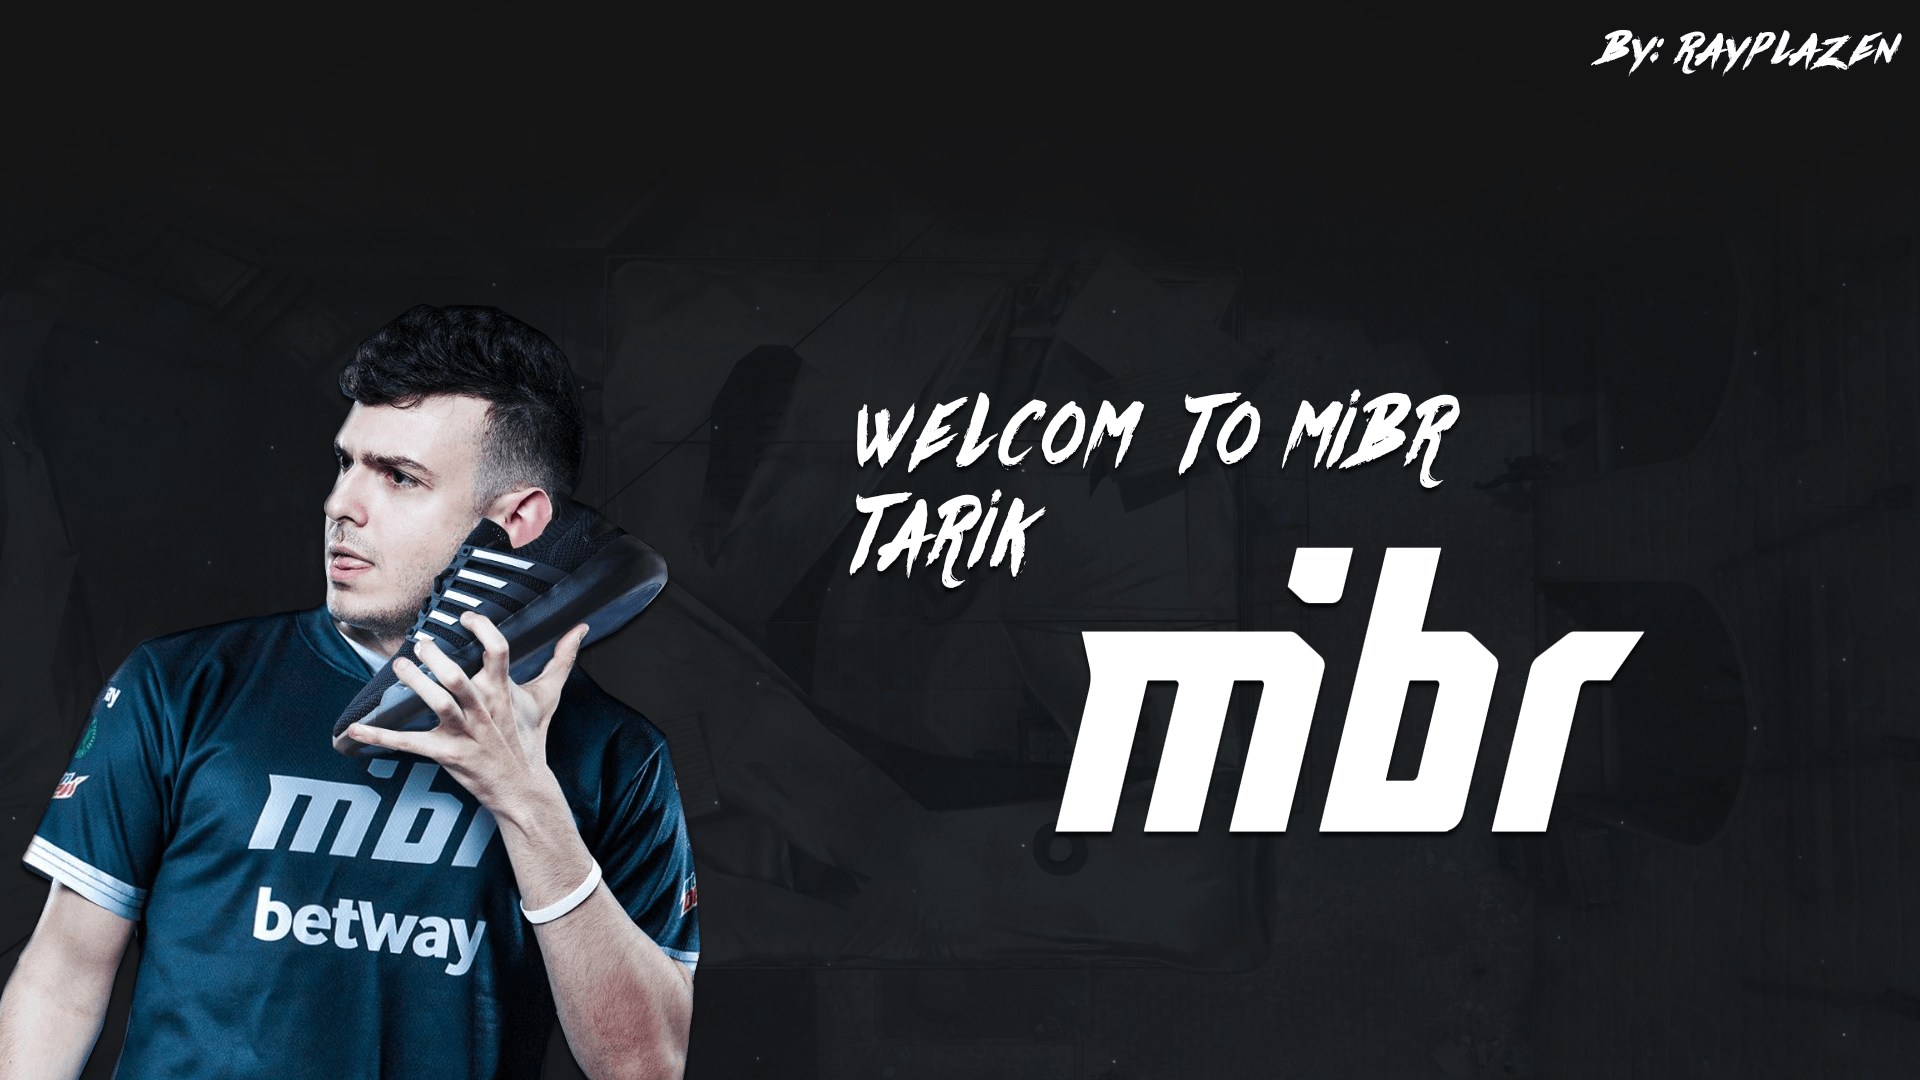 MIBR wallpaper created by Vstectity